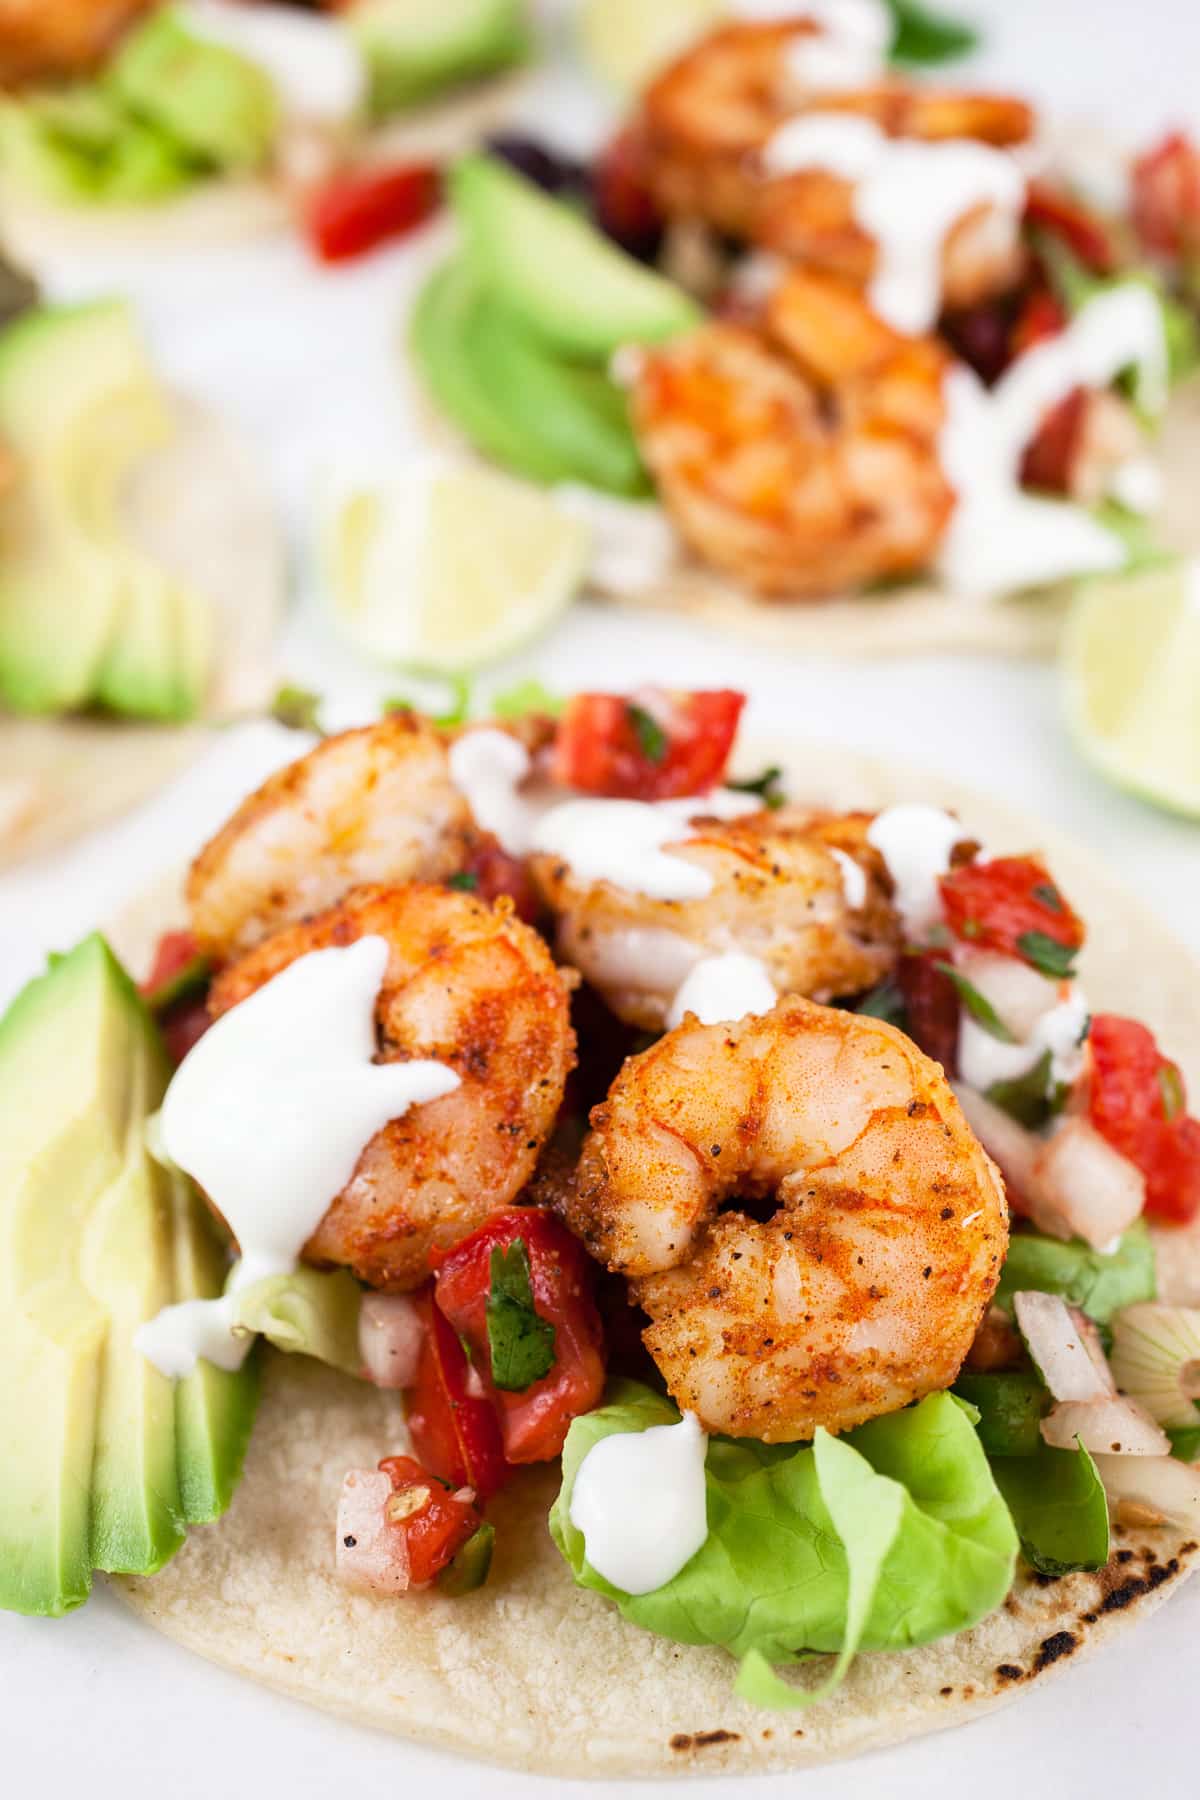 Sheet pan shrimp tacos with toppings and lime crema on corn tortillas.